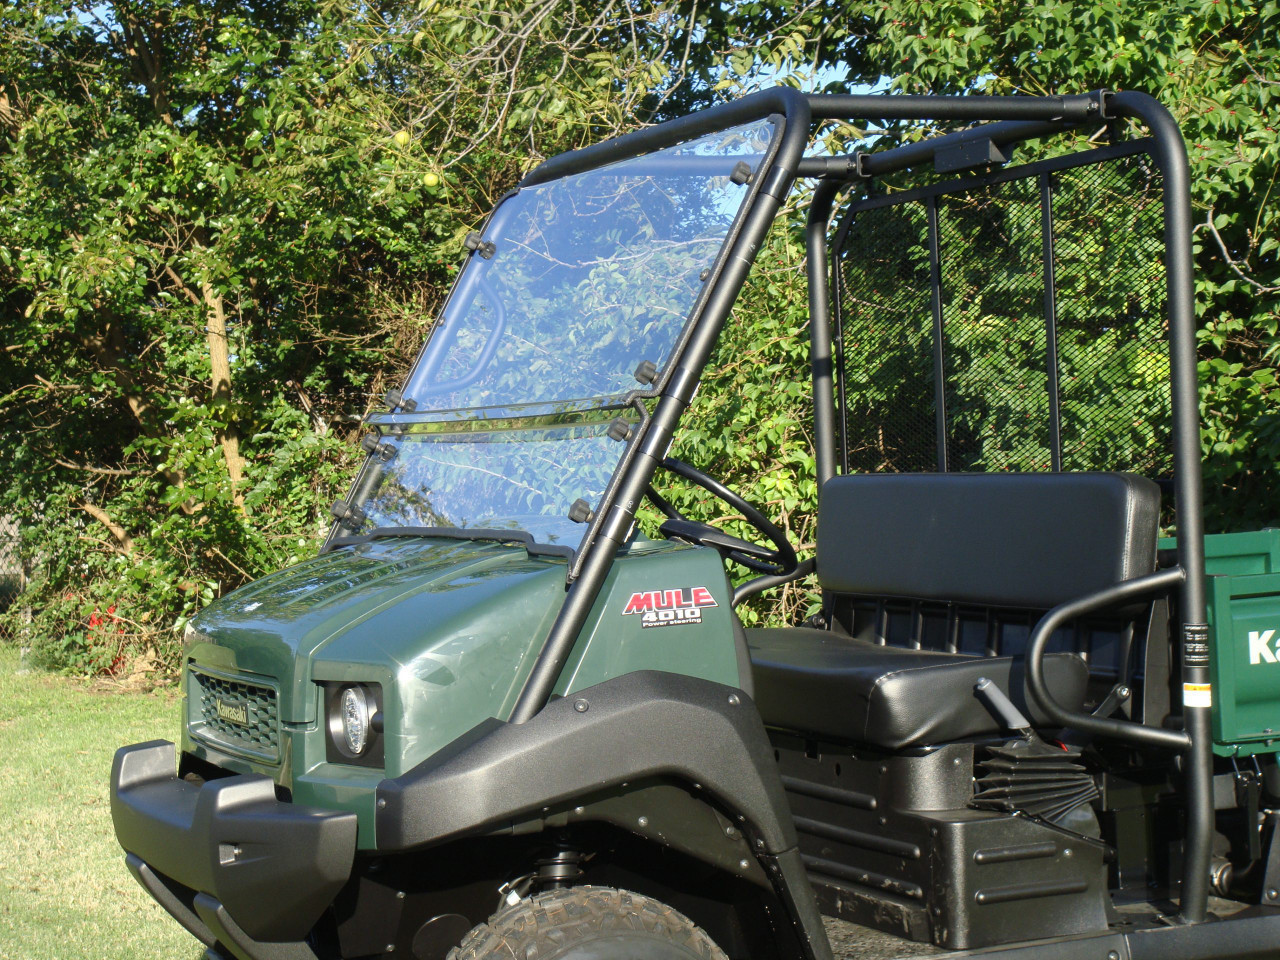 3 Star side x side Kawasaki Mule 4000/4010 trans windshield front and side angle view